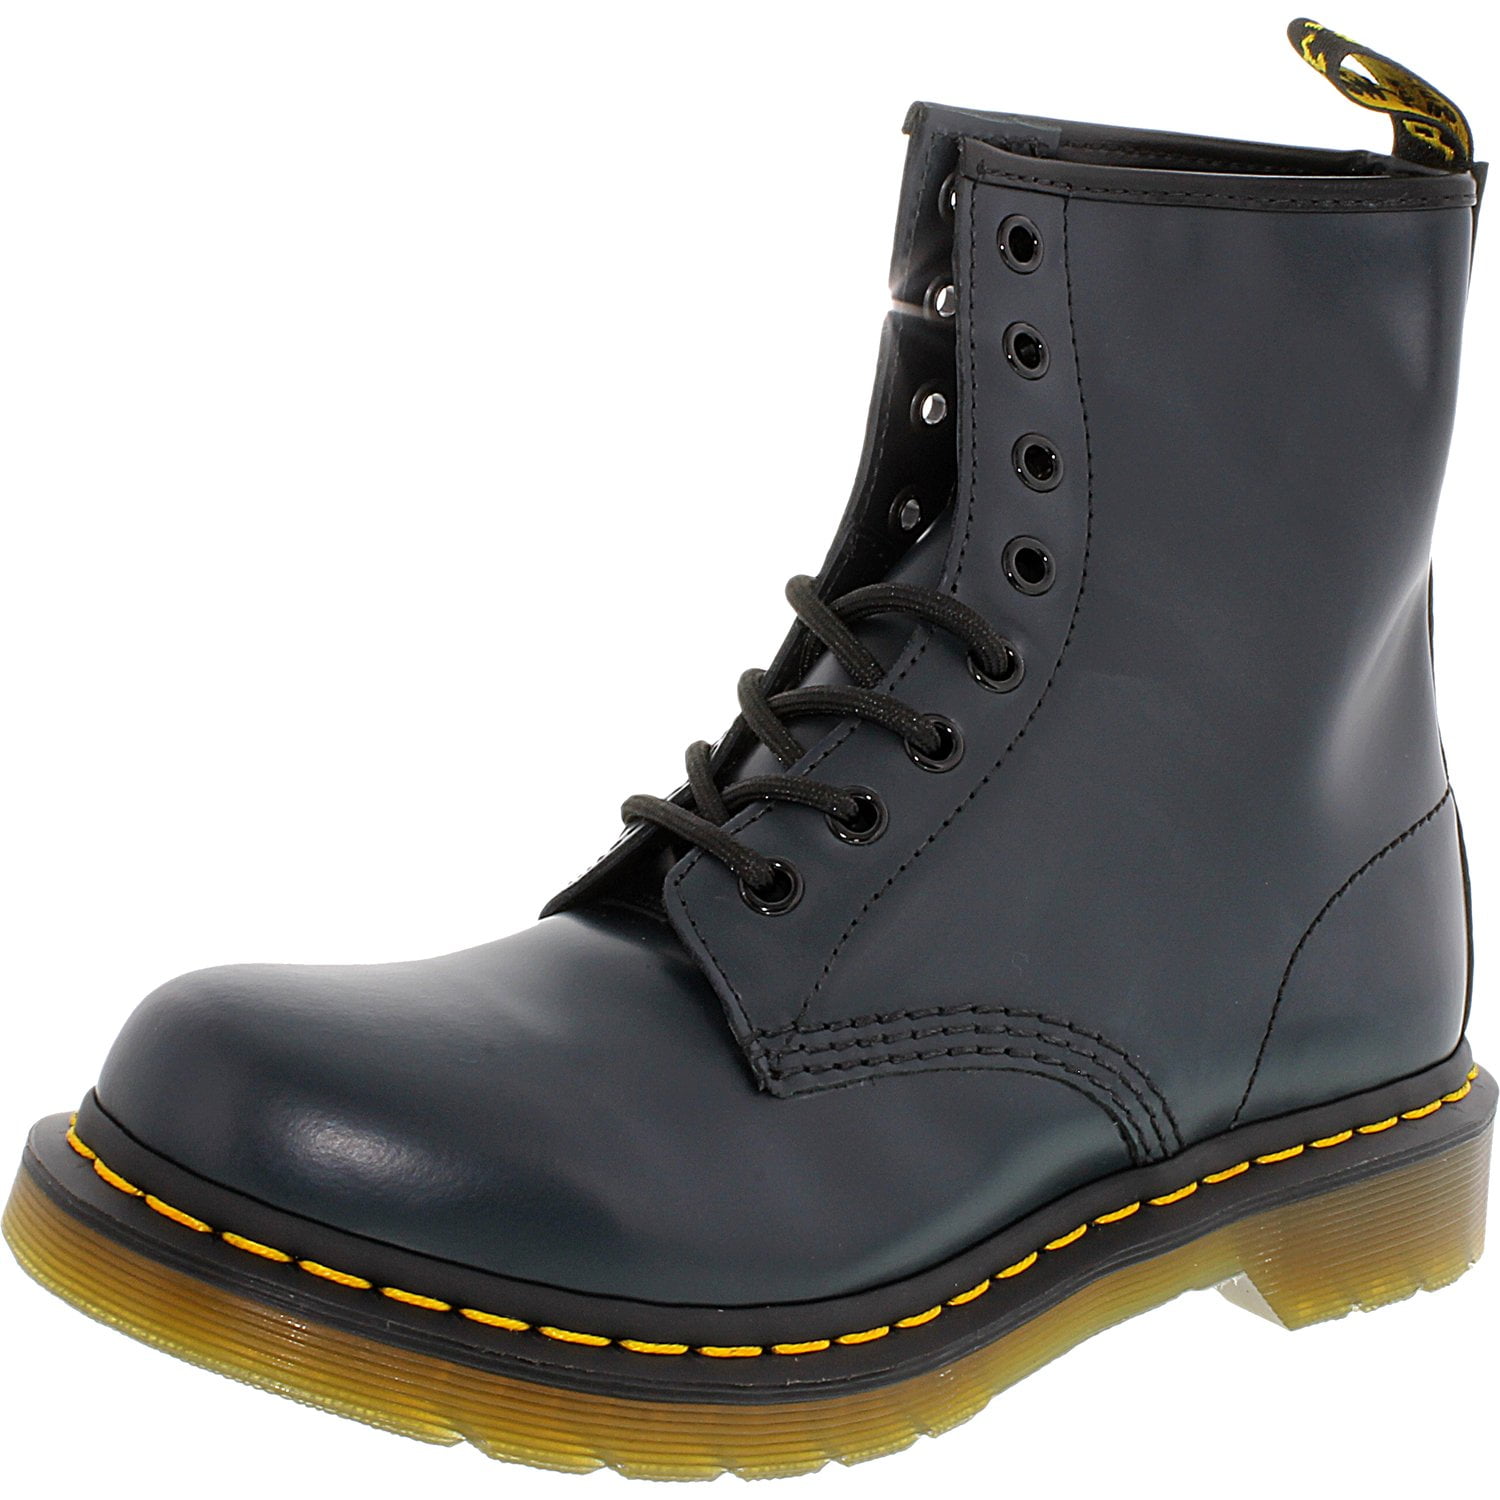 Dr. Martens Women's 1460 8-Eye Navy High-Top Leather Boot - 7M ...